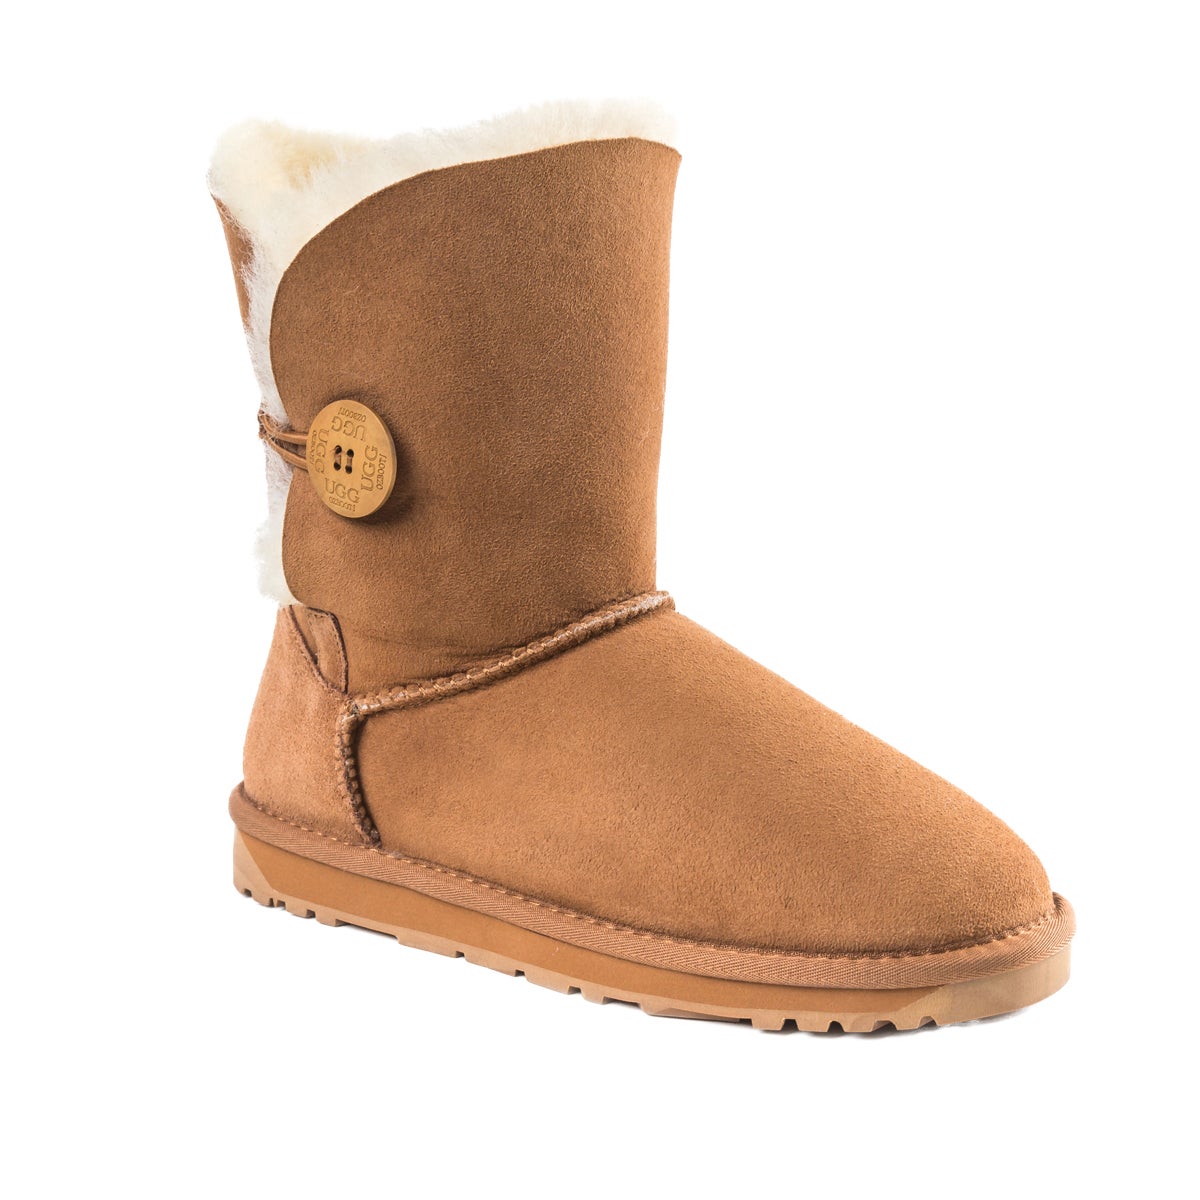 Ugg Classic Short Button Boots (Water Resistant) Ozwear Ugg